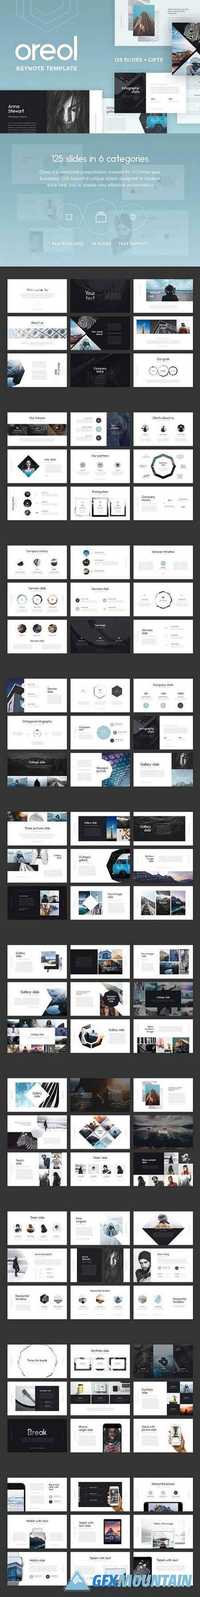 Oreol Keynote Template + GIFTS 1353511